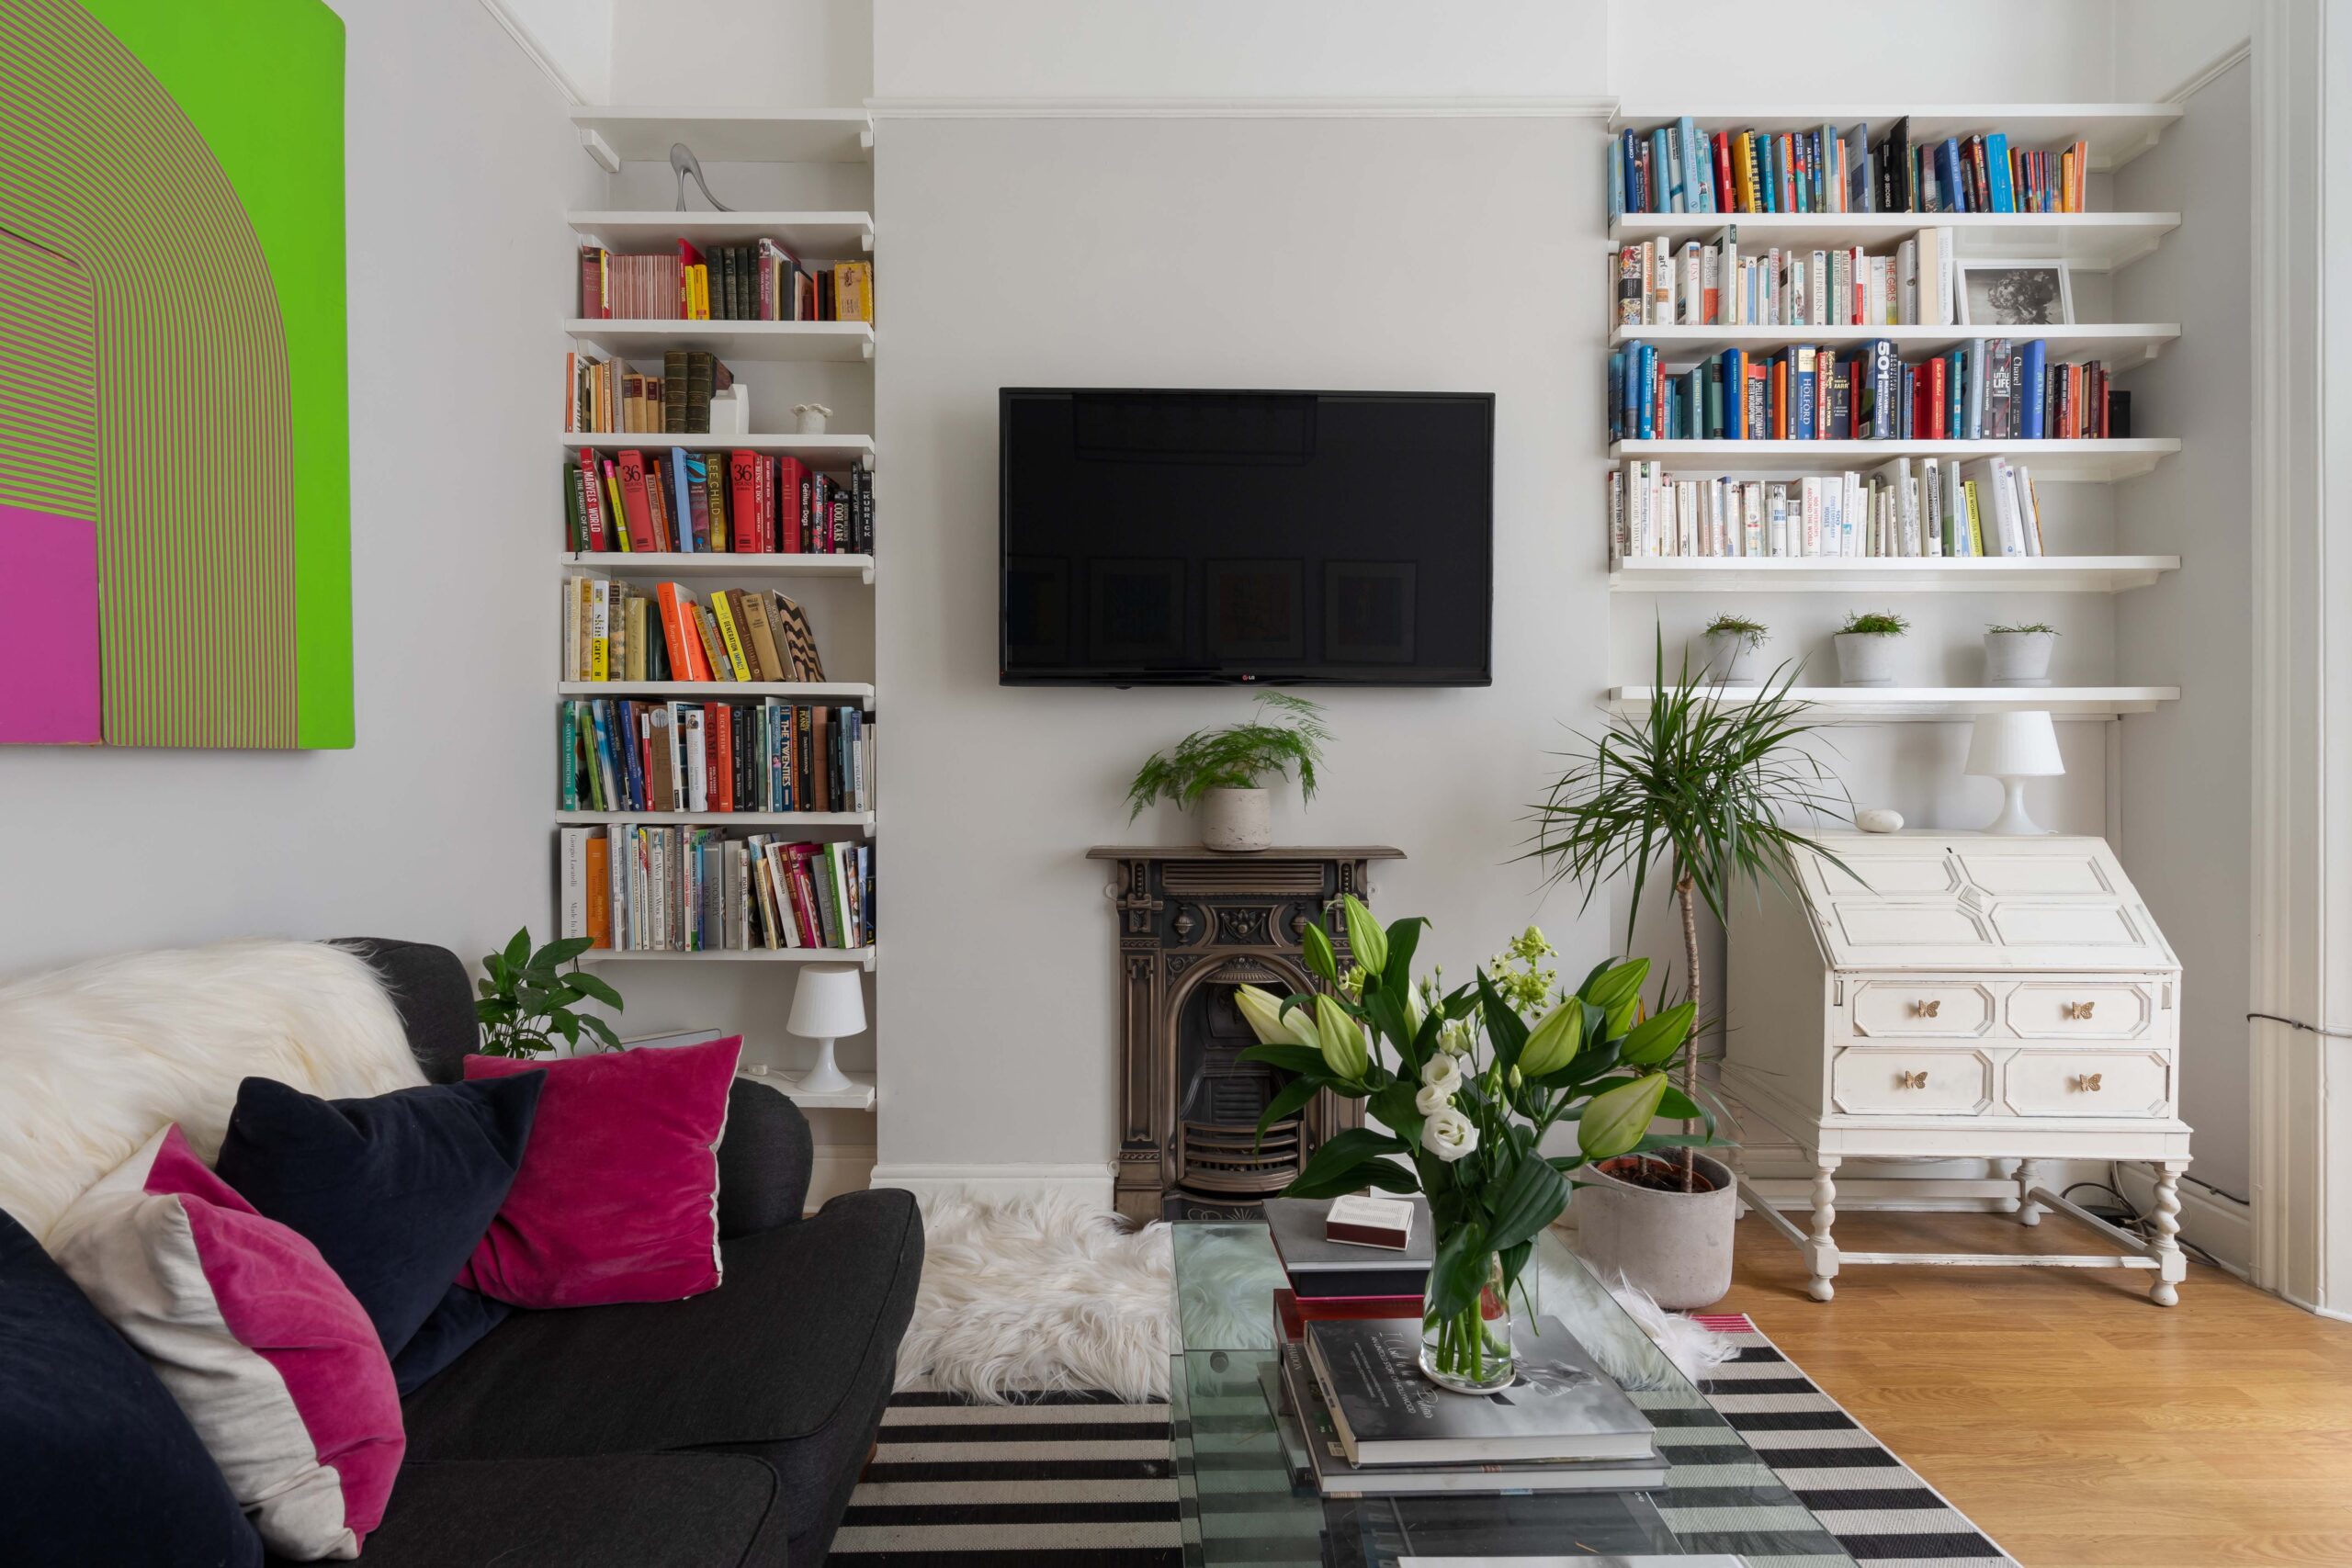 For Sale: Westbourne Park Road Notting Hill W11 modern reception room with bookcases and stylish furniture